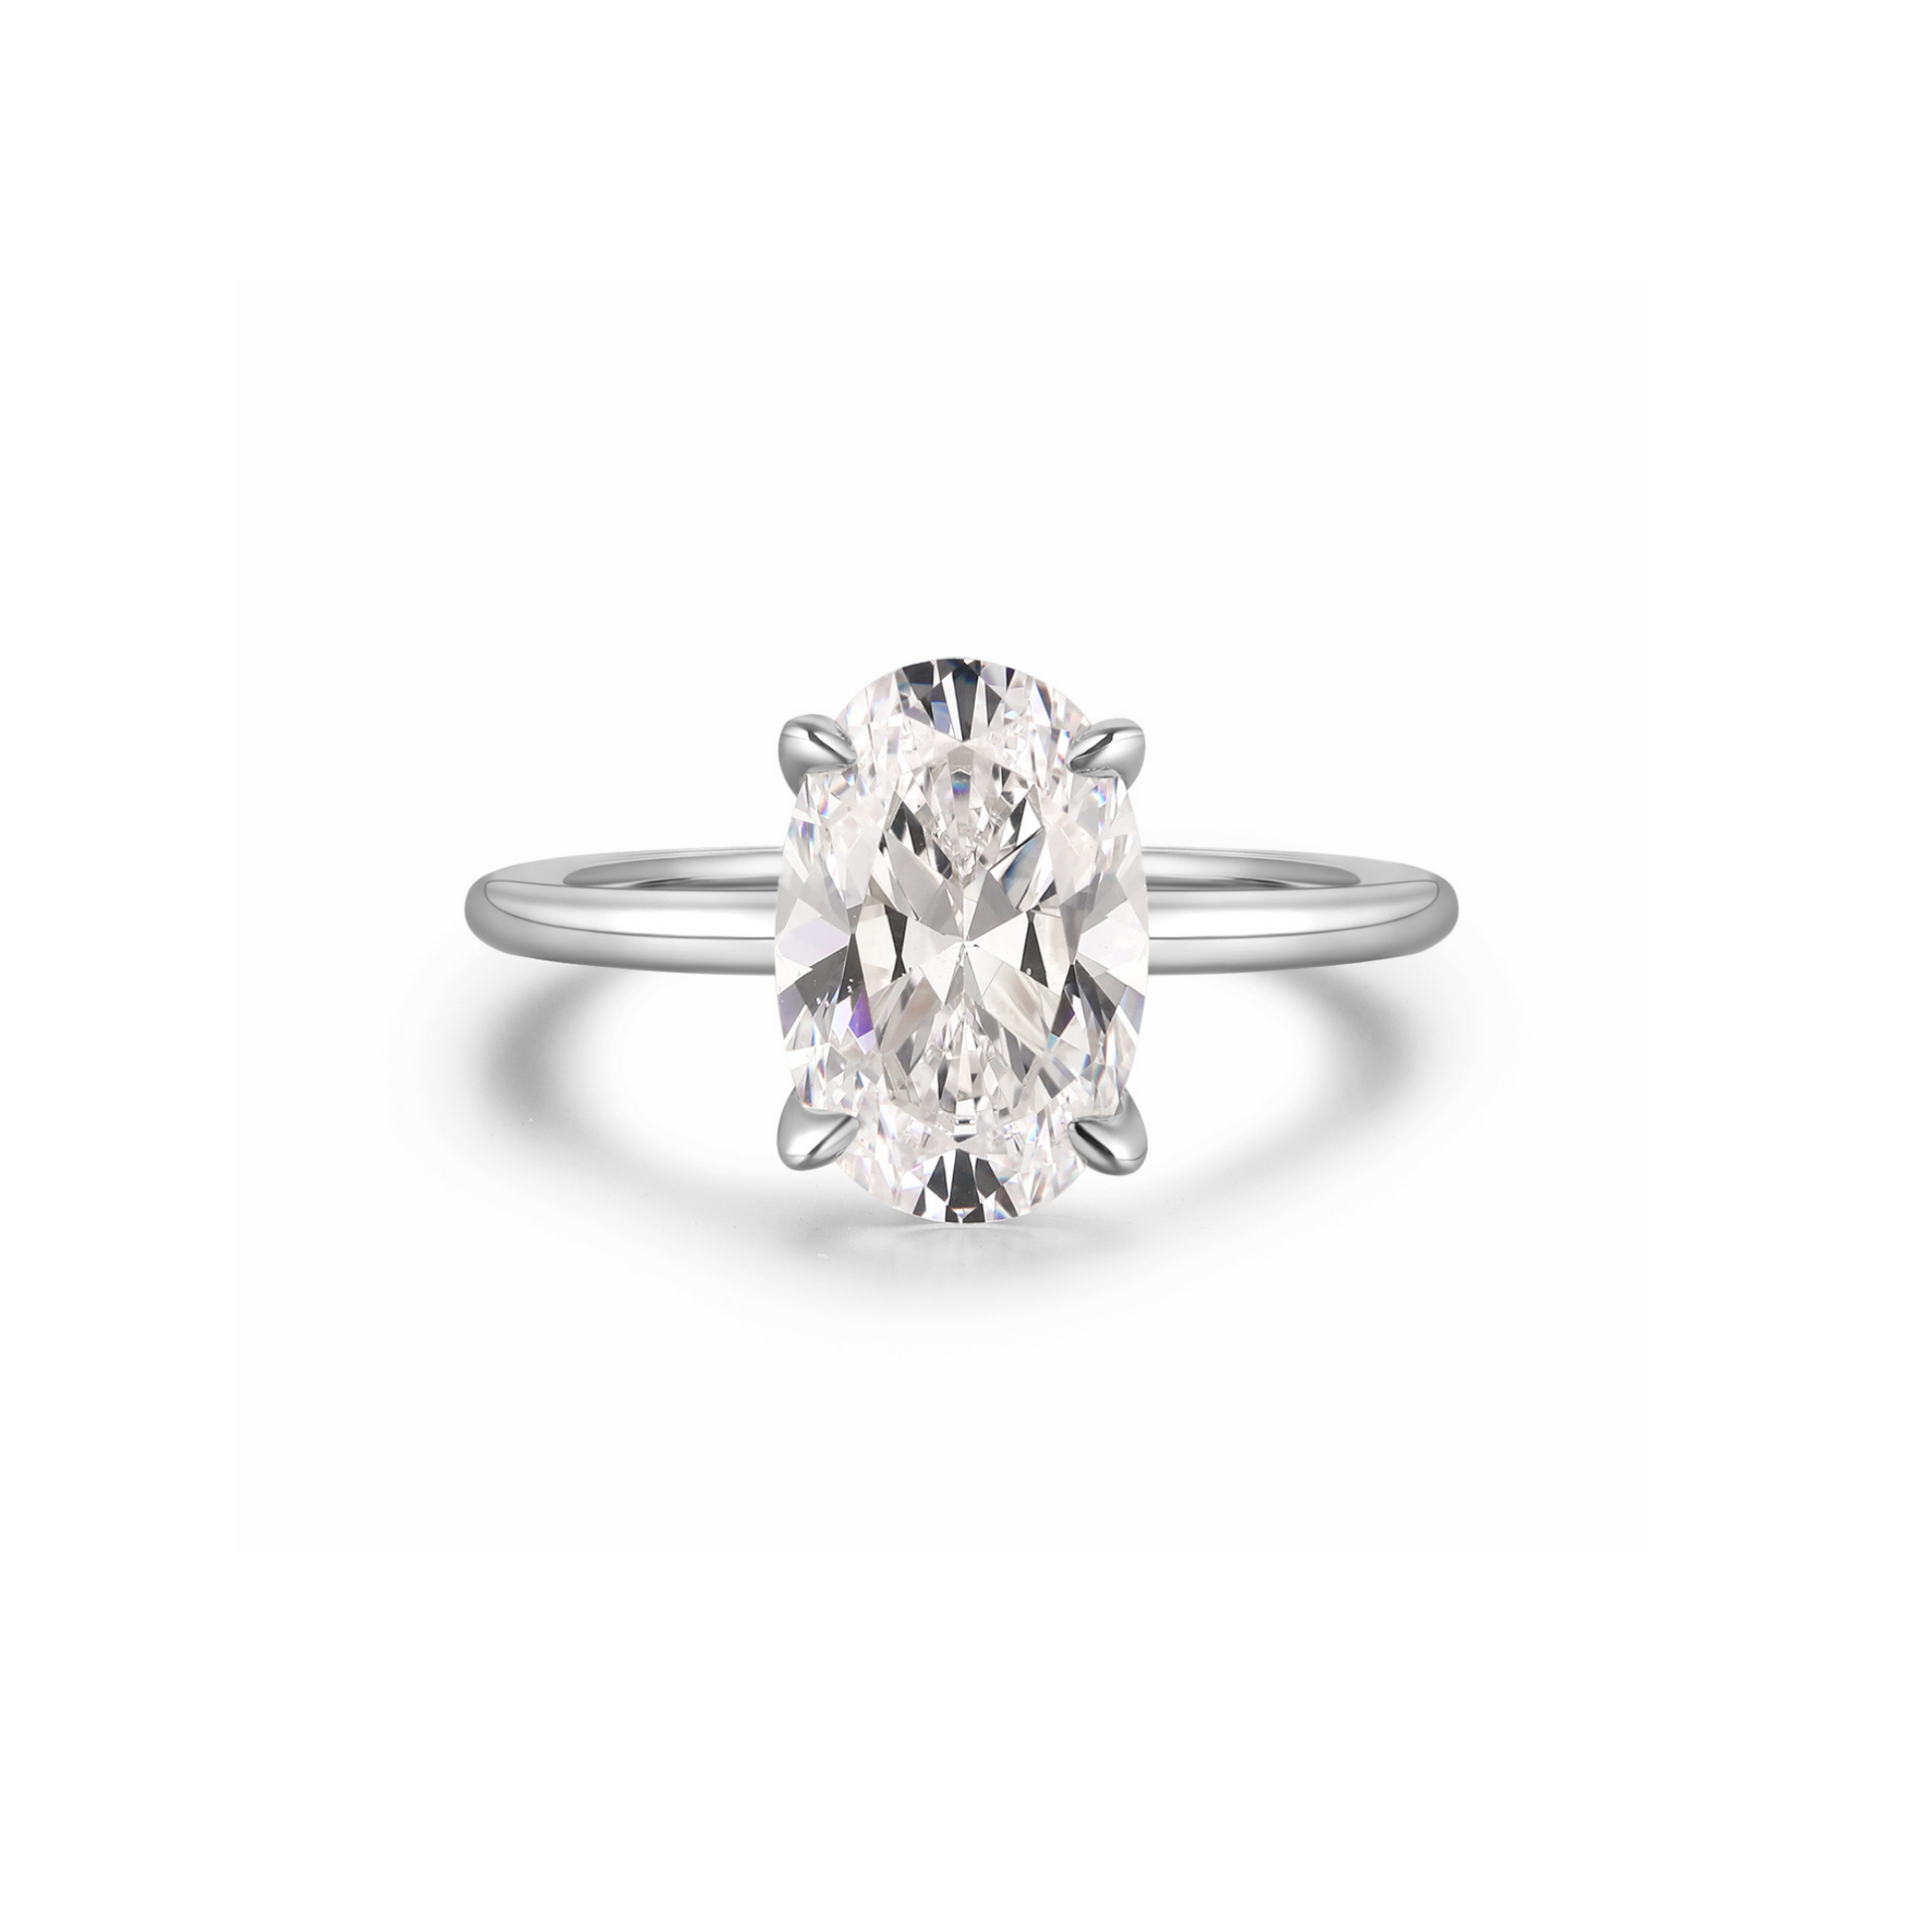 The Promise Ring Co. Oval Solitaire diamond simulant ring. In Sterling Silver.